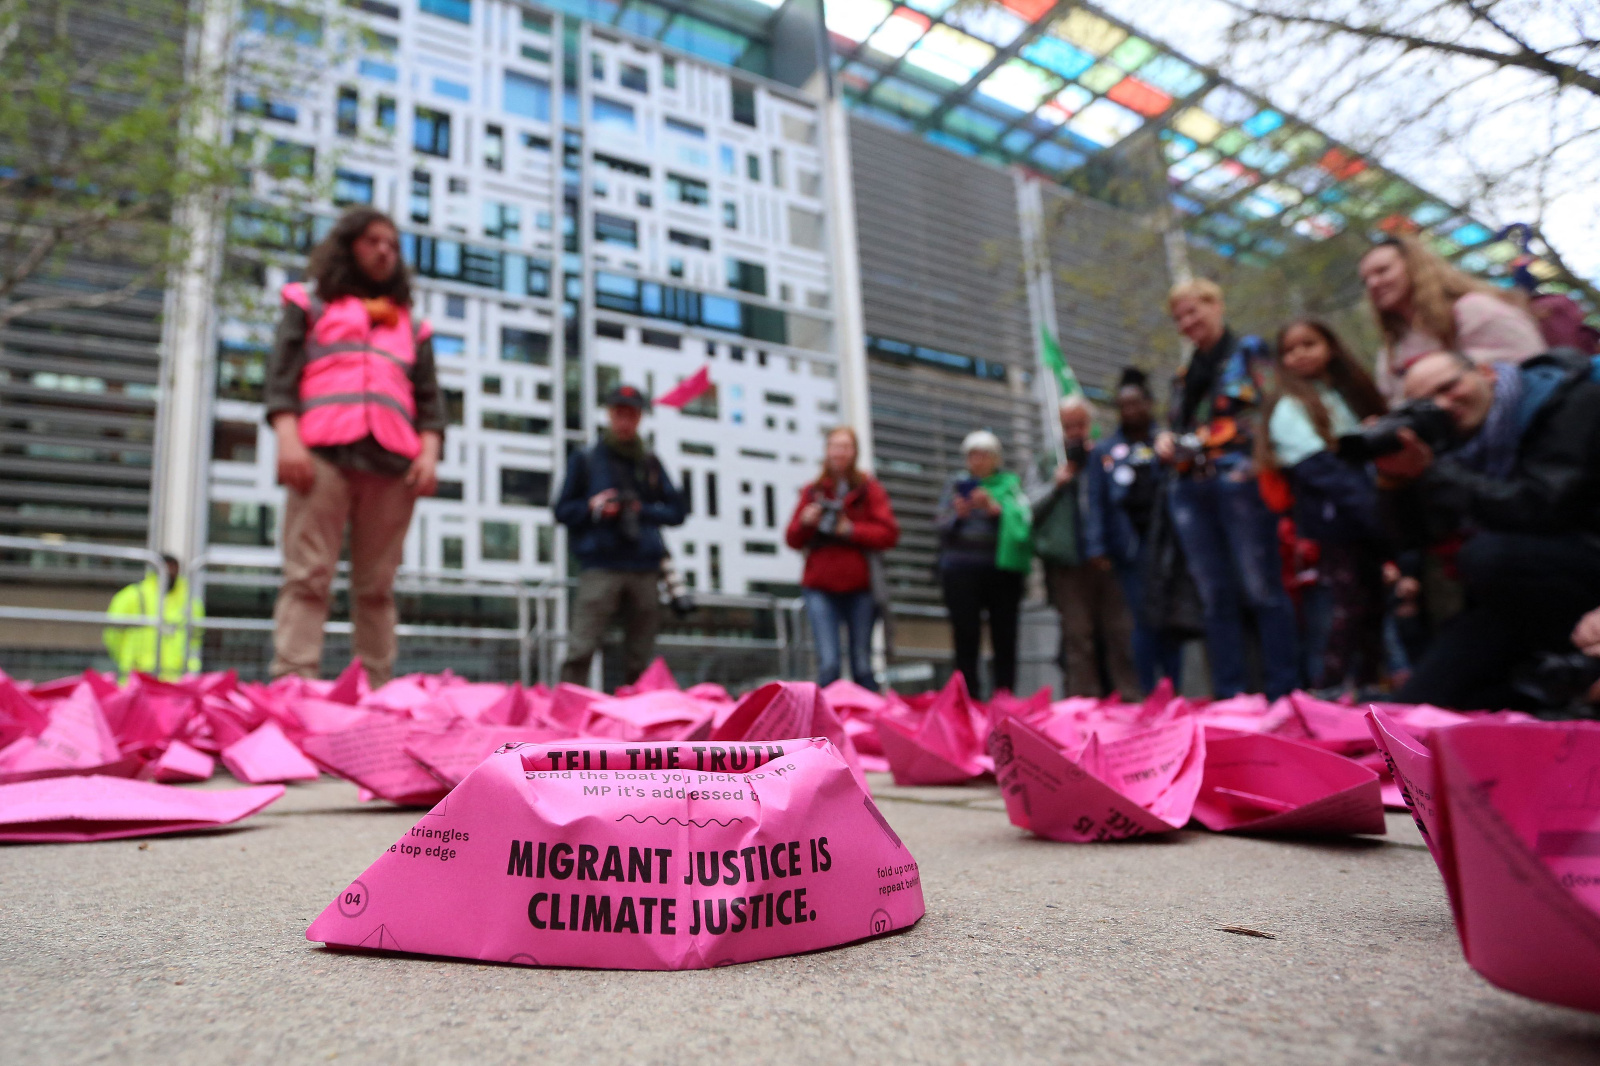 A pink boat-shaped object at a protest says "migrant justice is climate justice."